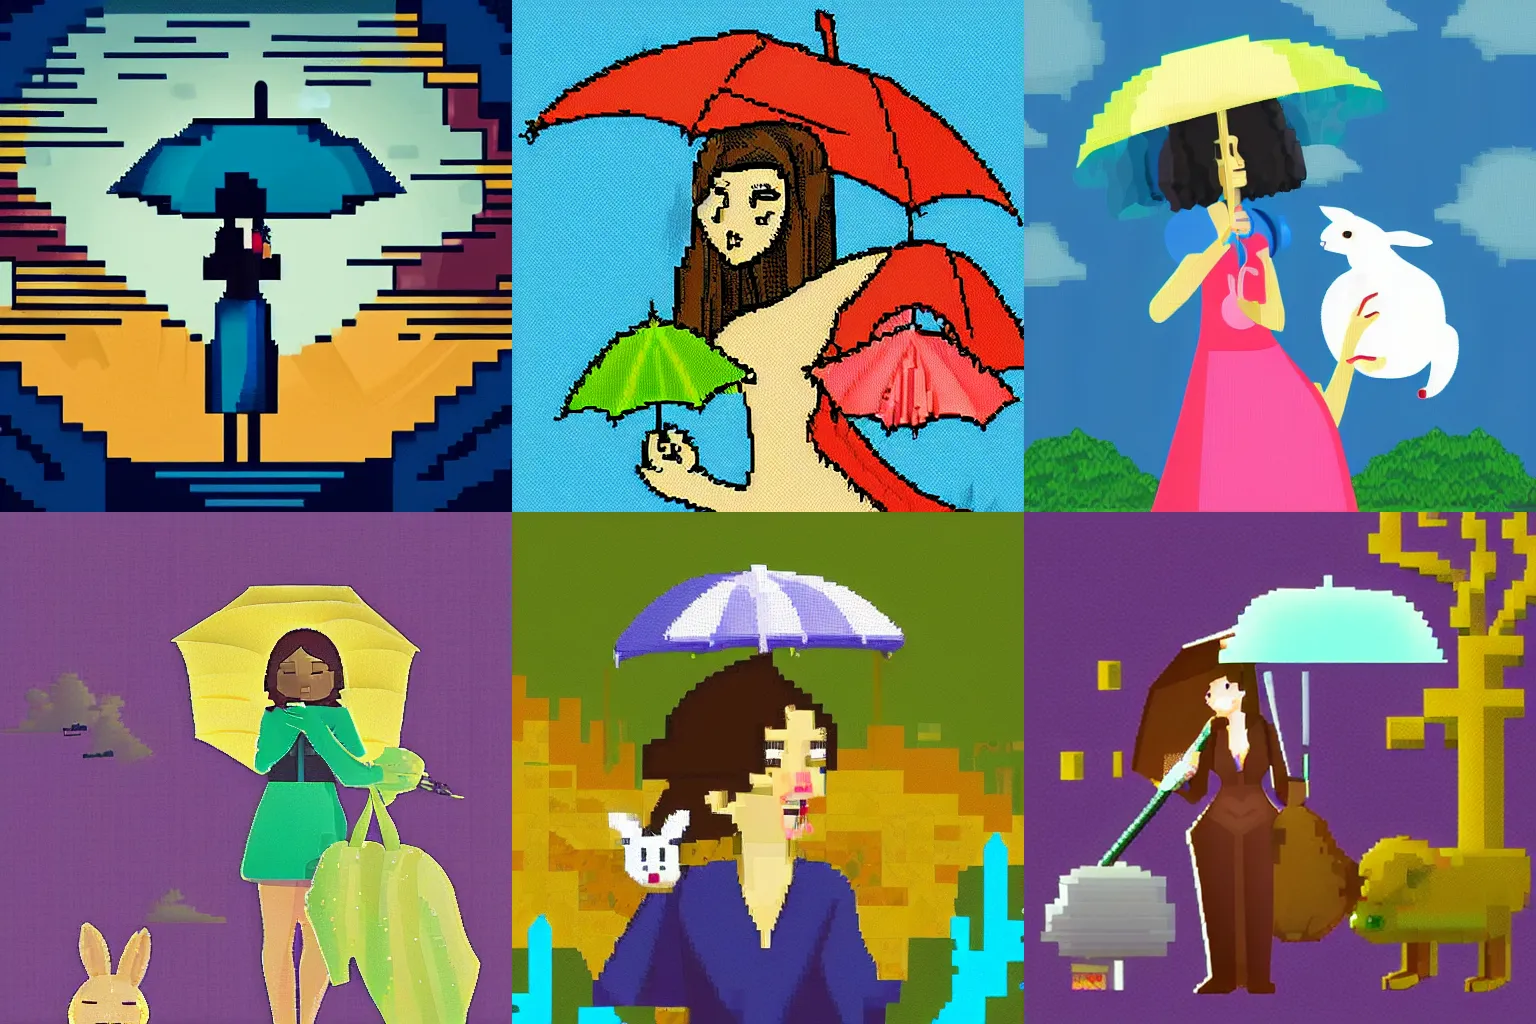 Prompt: A surreal dream scene of a woman holding an umbrella and a rabbit hiding inside it, pixel art